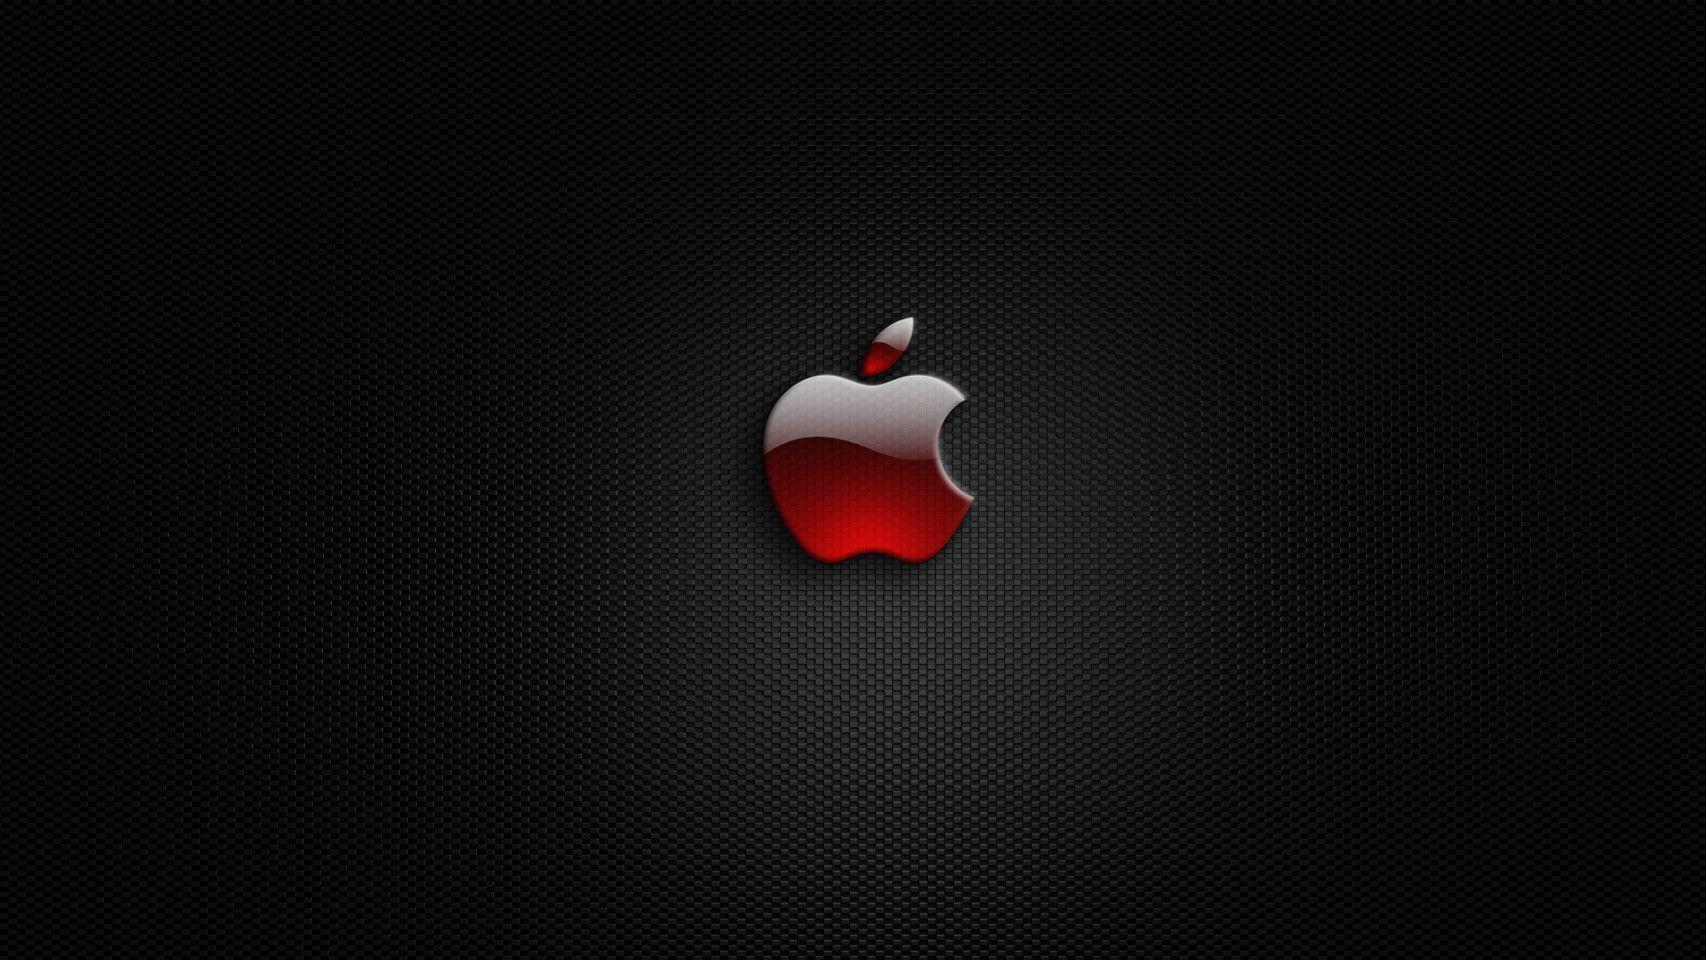 Red Apple Wallpapers - Wallpaper Cave